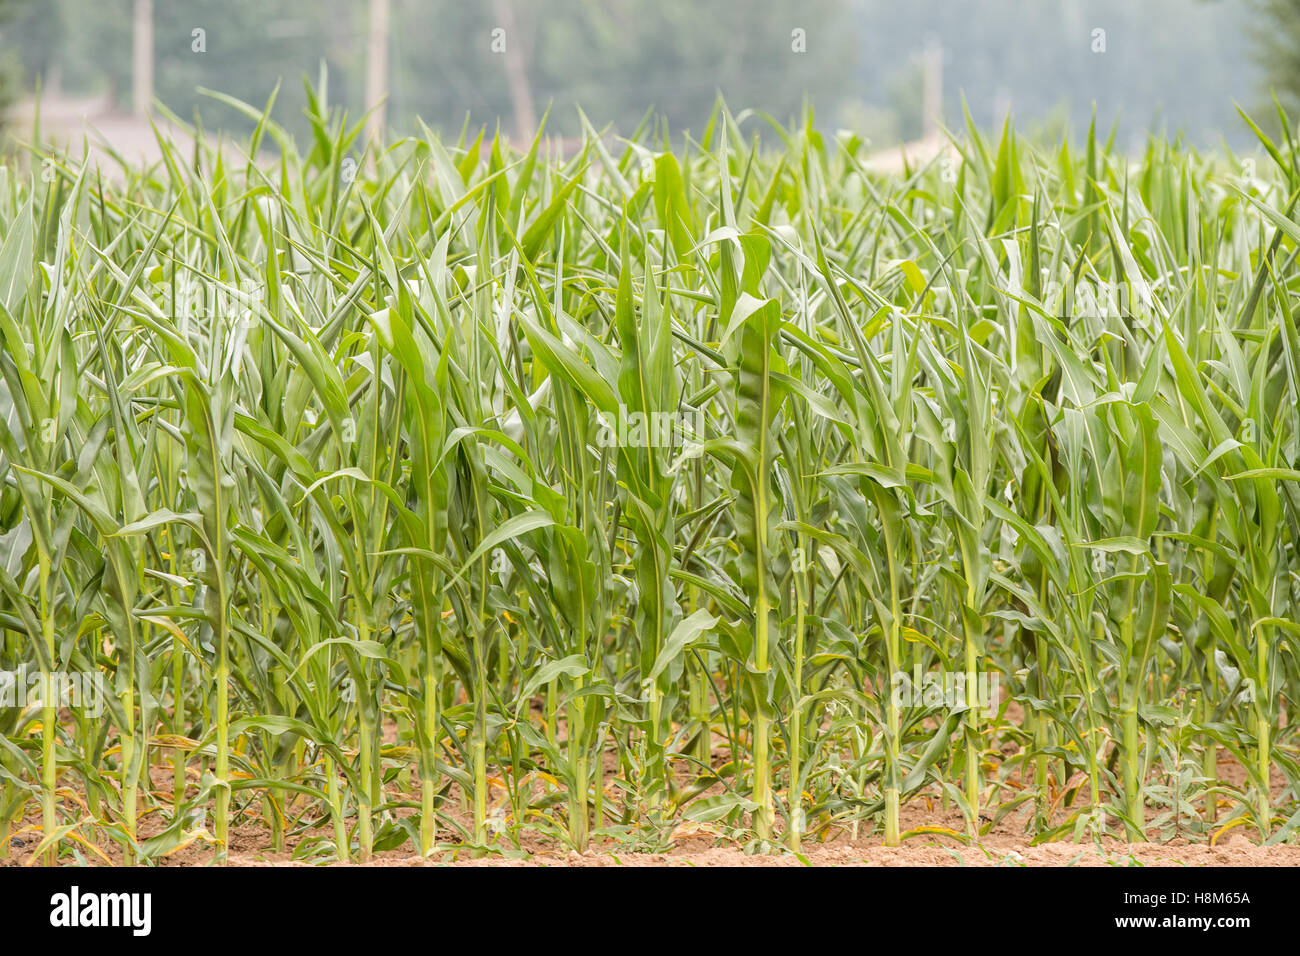 Beijing, China - Stalks of corn growing in a field on a farm near Beijing, China. Stock Photo